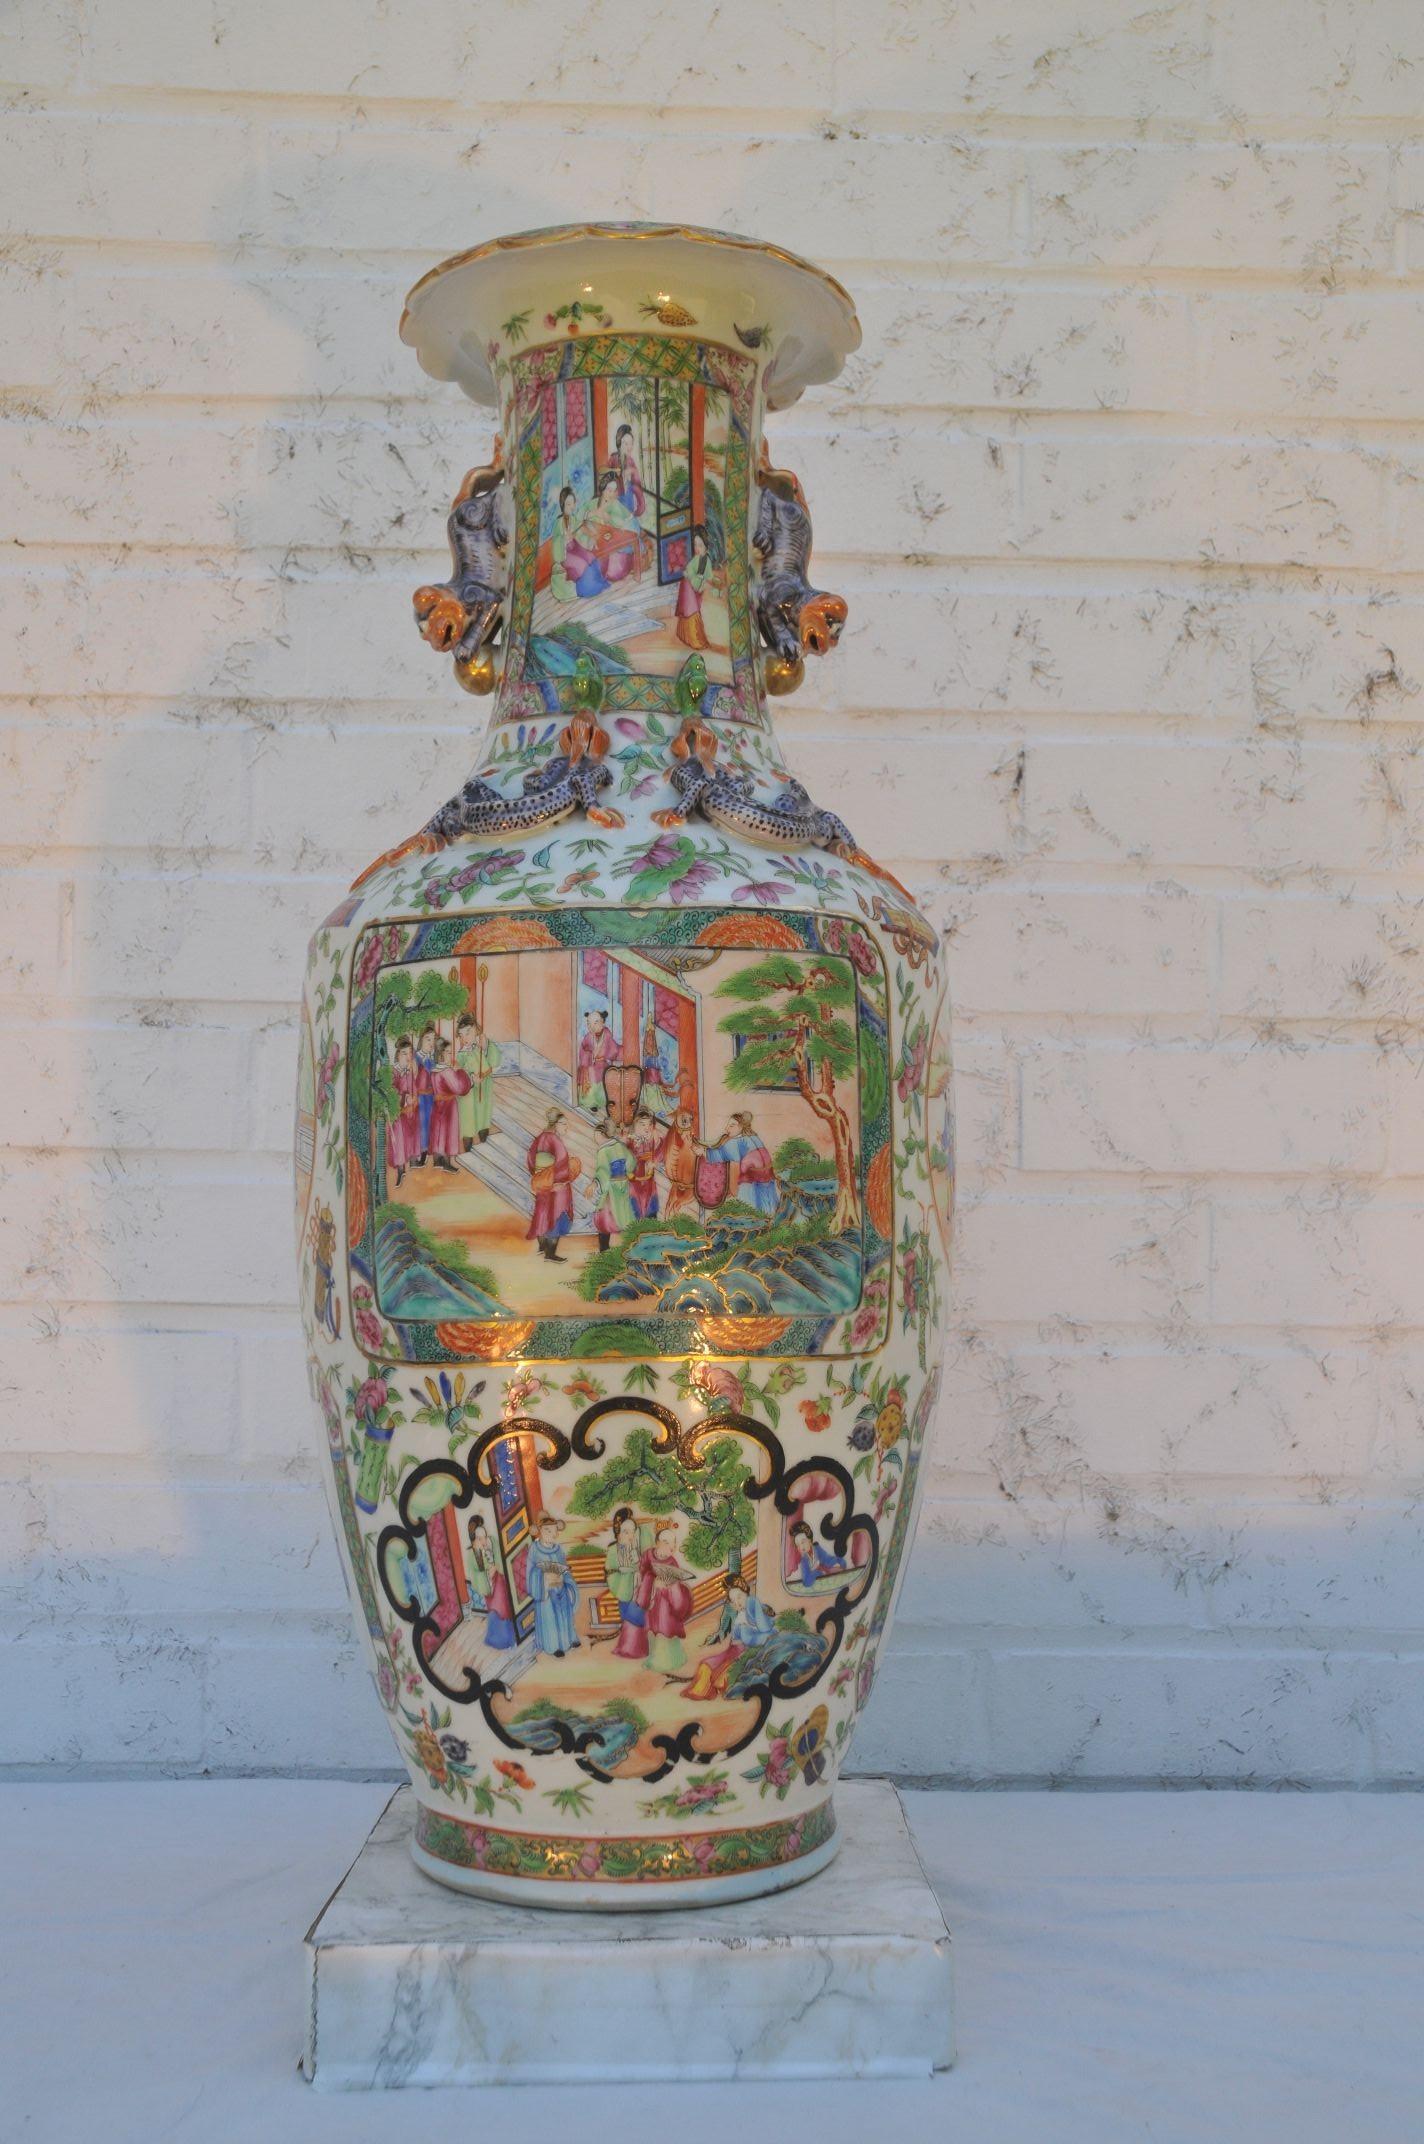 The baluster sides surmounted on a flower-shaped everted rim, painted overall in vivid enamels and gilt with shaped panels enclosing scenes with dignitaries in a flowering garden, all reserved on a gilt ground enriched with an abundance of pink